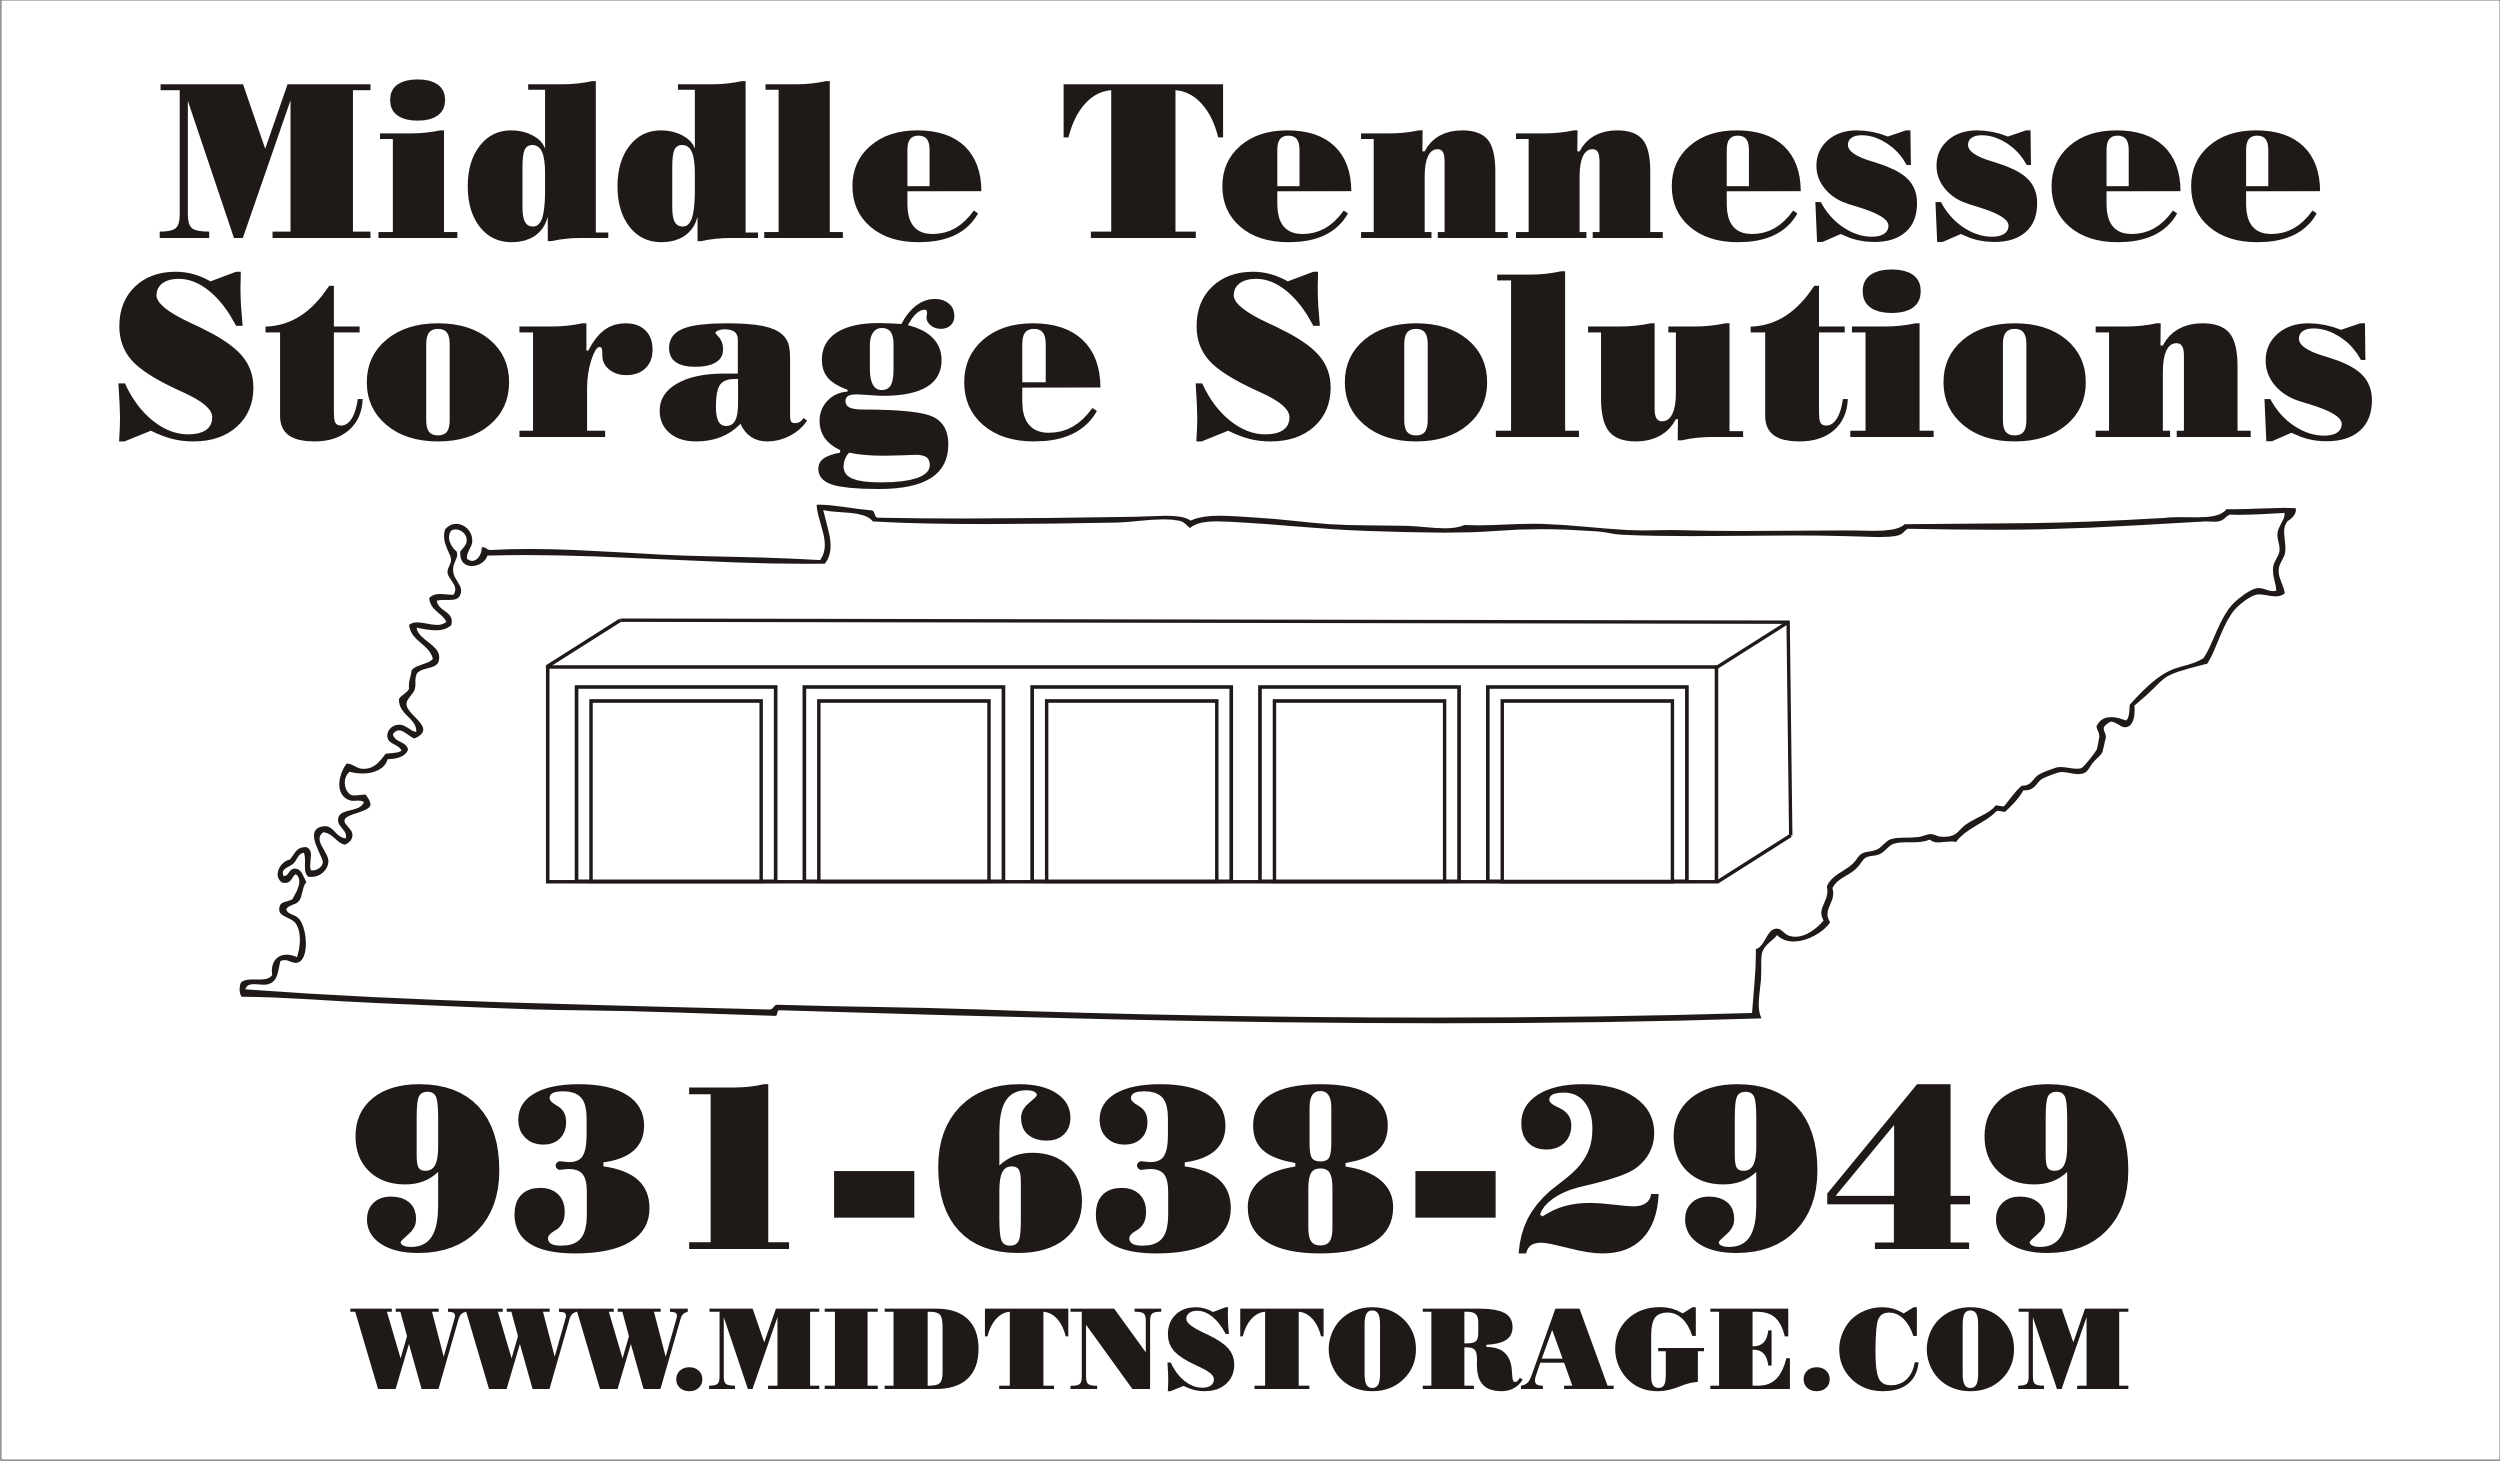 Middle Tennessee Storage Solutions